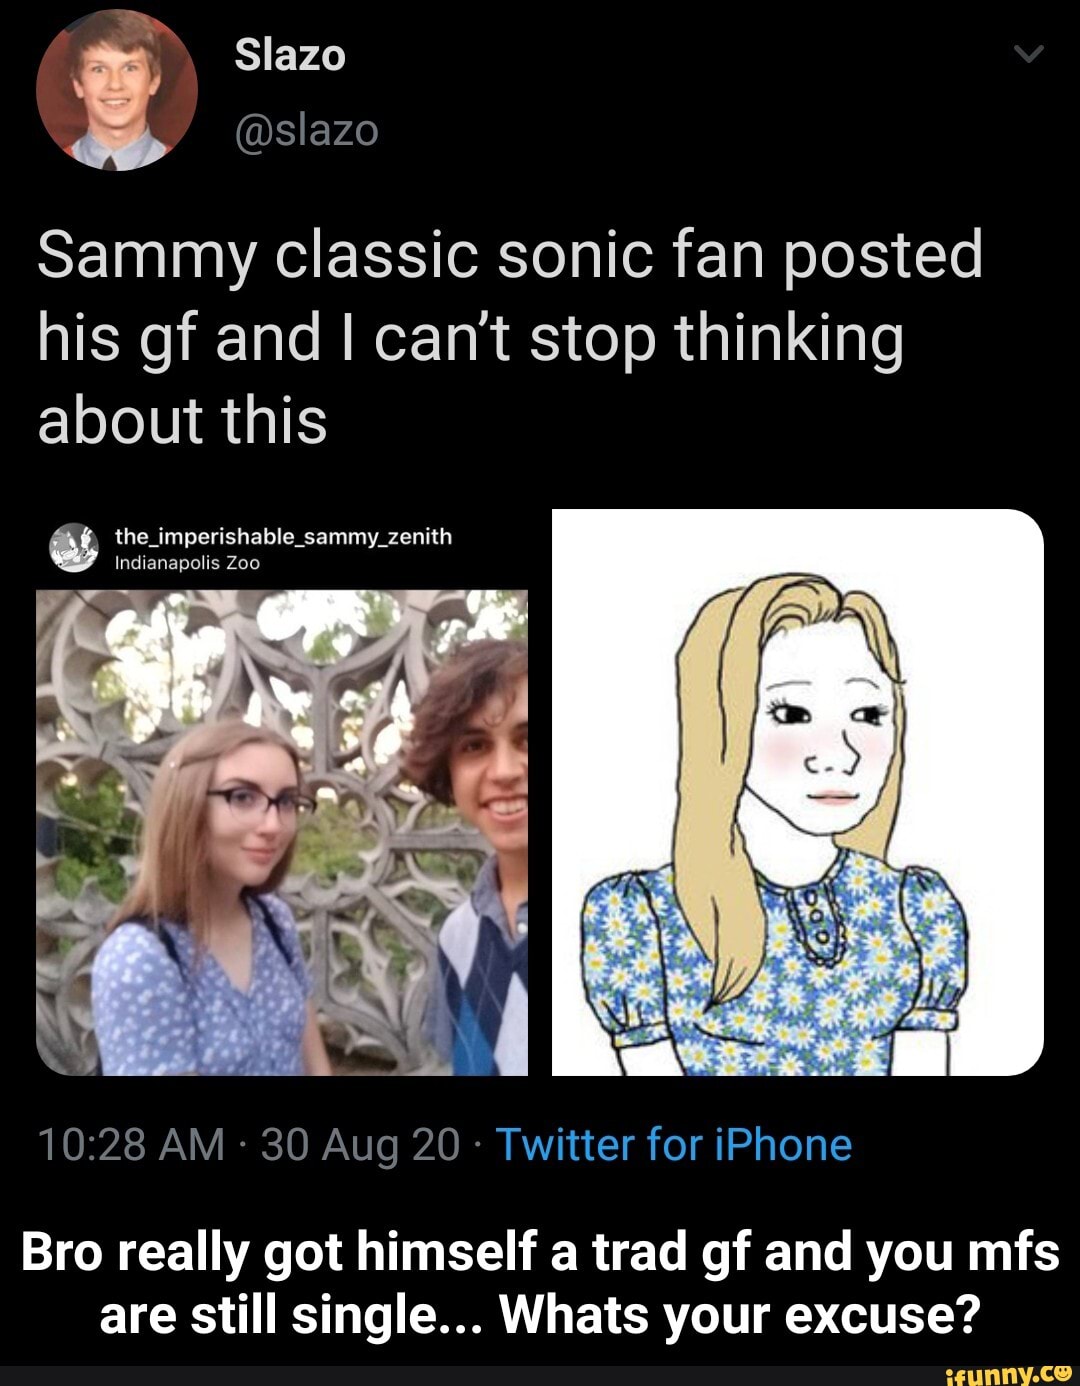 My Slazo Slazo Sammy Classic Sonic Fan Posted His Gf And I Can T Stop Thinking About This The Imperishable Sammy Zenith Polis Zoo Indiana Am 30 Aug Twitter For Iphone Bro Really Got Himself